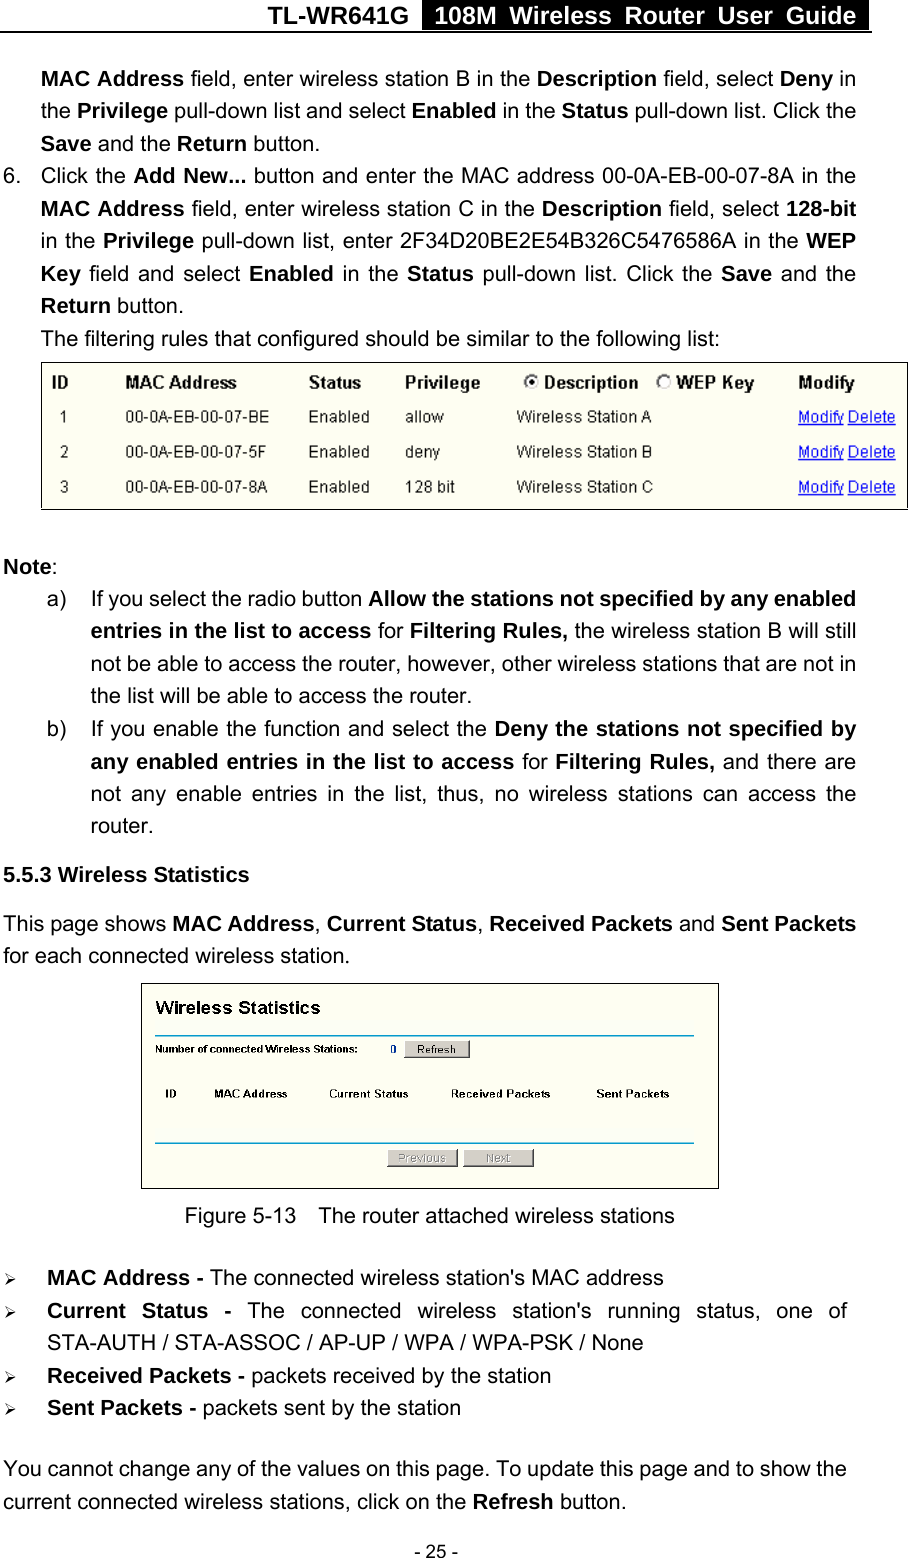 TL-WR641G   108M Wireless Router User Guide   - 25 -MAC Address field, enter wireless station B in the Description field, select Deny in the Privilege pull-down list and select Enabled in the Status pull-down list. Click the Save and the Return button. 6. Click the Add New... button and enter the MAC address 00-0A-EB-00-07-8A in the MAC Address field, enter wireless station C in the Description field, select 128-bit in the Privilege pull-down list, enter 2F34D20BE2E54B326C5476586A in the WEP Key field and select Enabled in the Status pull-down list. Click the Save and the Return button. The filtering rules that configured should be similar to the following list:  Note:  a)  If you select the radio button Allow the stations not specified by any enabled entries in the list to access for Filtering Rules, the wireless station B will still not be able to access the router, however, other wireless stations that are not in the list will be able to access the router. b)  If you enable the function and select the Deny the stations not specified by any enabled entries in the list to access for Filtering Rules, and there are not any enable entries in the list, thus, no wireless stations can access the router. 5.5.3 Wireless Statistics This page shows MAC Address, Current Status, Received Packets and Sent Packets for each connected wireless station.  Figure 5-13    The router attached wireless stations ¾ MAC Address - The connected wireless station&apos;s MAC address ¾ Current Status - The connected wireless station&apos;s running status, one of STA-AUTH / STA-ASSOC / AP-UP / WPA / WPA-PSK / None ¾ Received Packets - packets received by the station ¾ Sent Packets - packets sent by the station You cannot change any of the values on this page. To update this page and to show the current connected wireless stations, click on the Refresh button.   